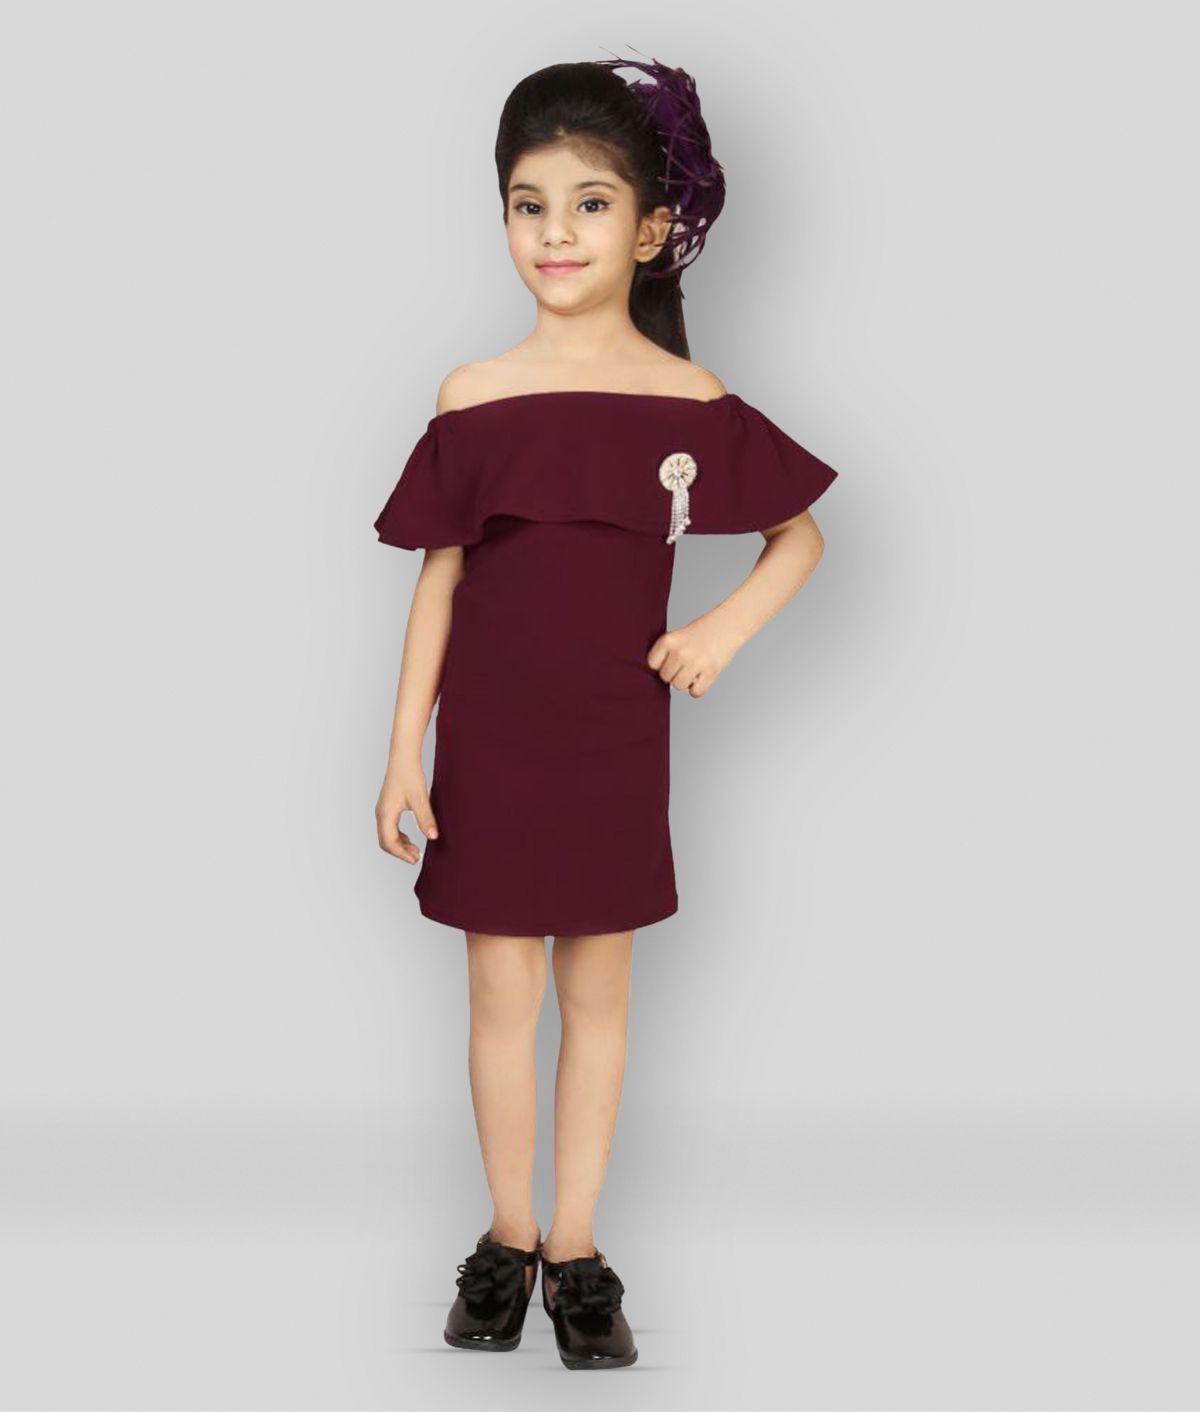     			Addyvero - Maroon Cotton Blend Girl's A-line Dress ( Pack of 1 )